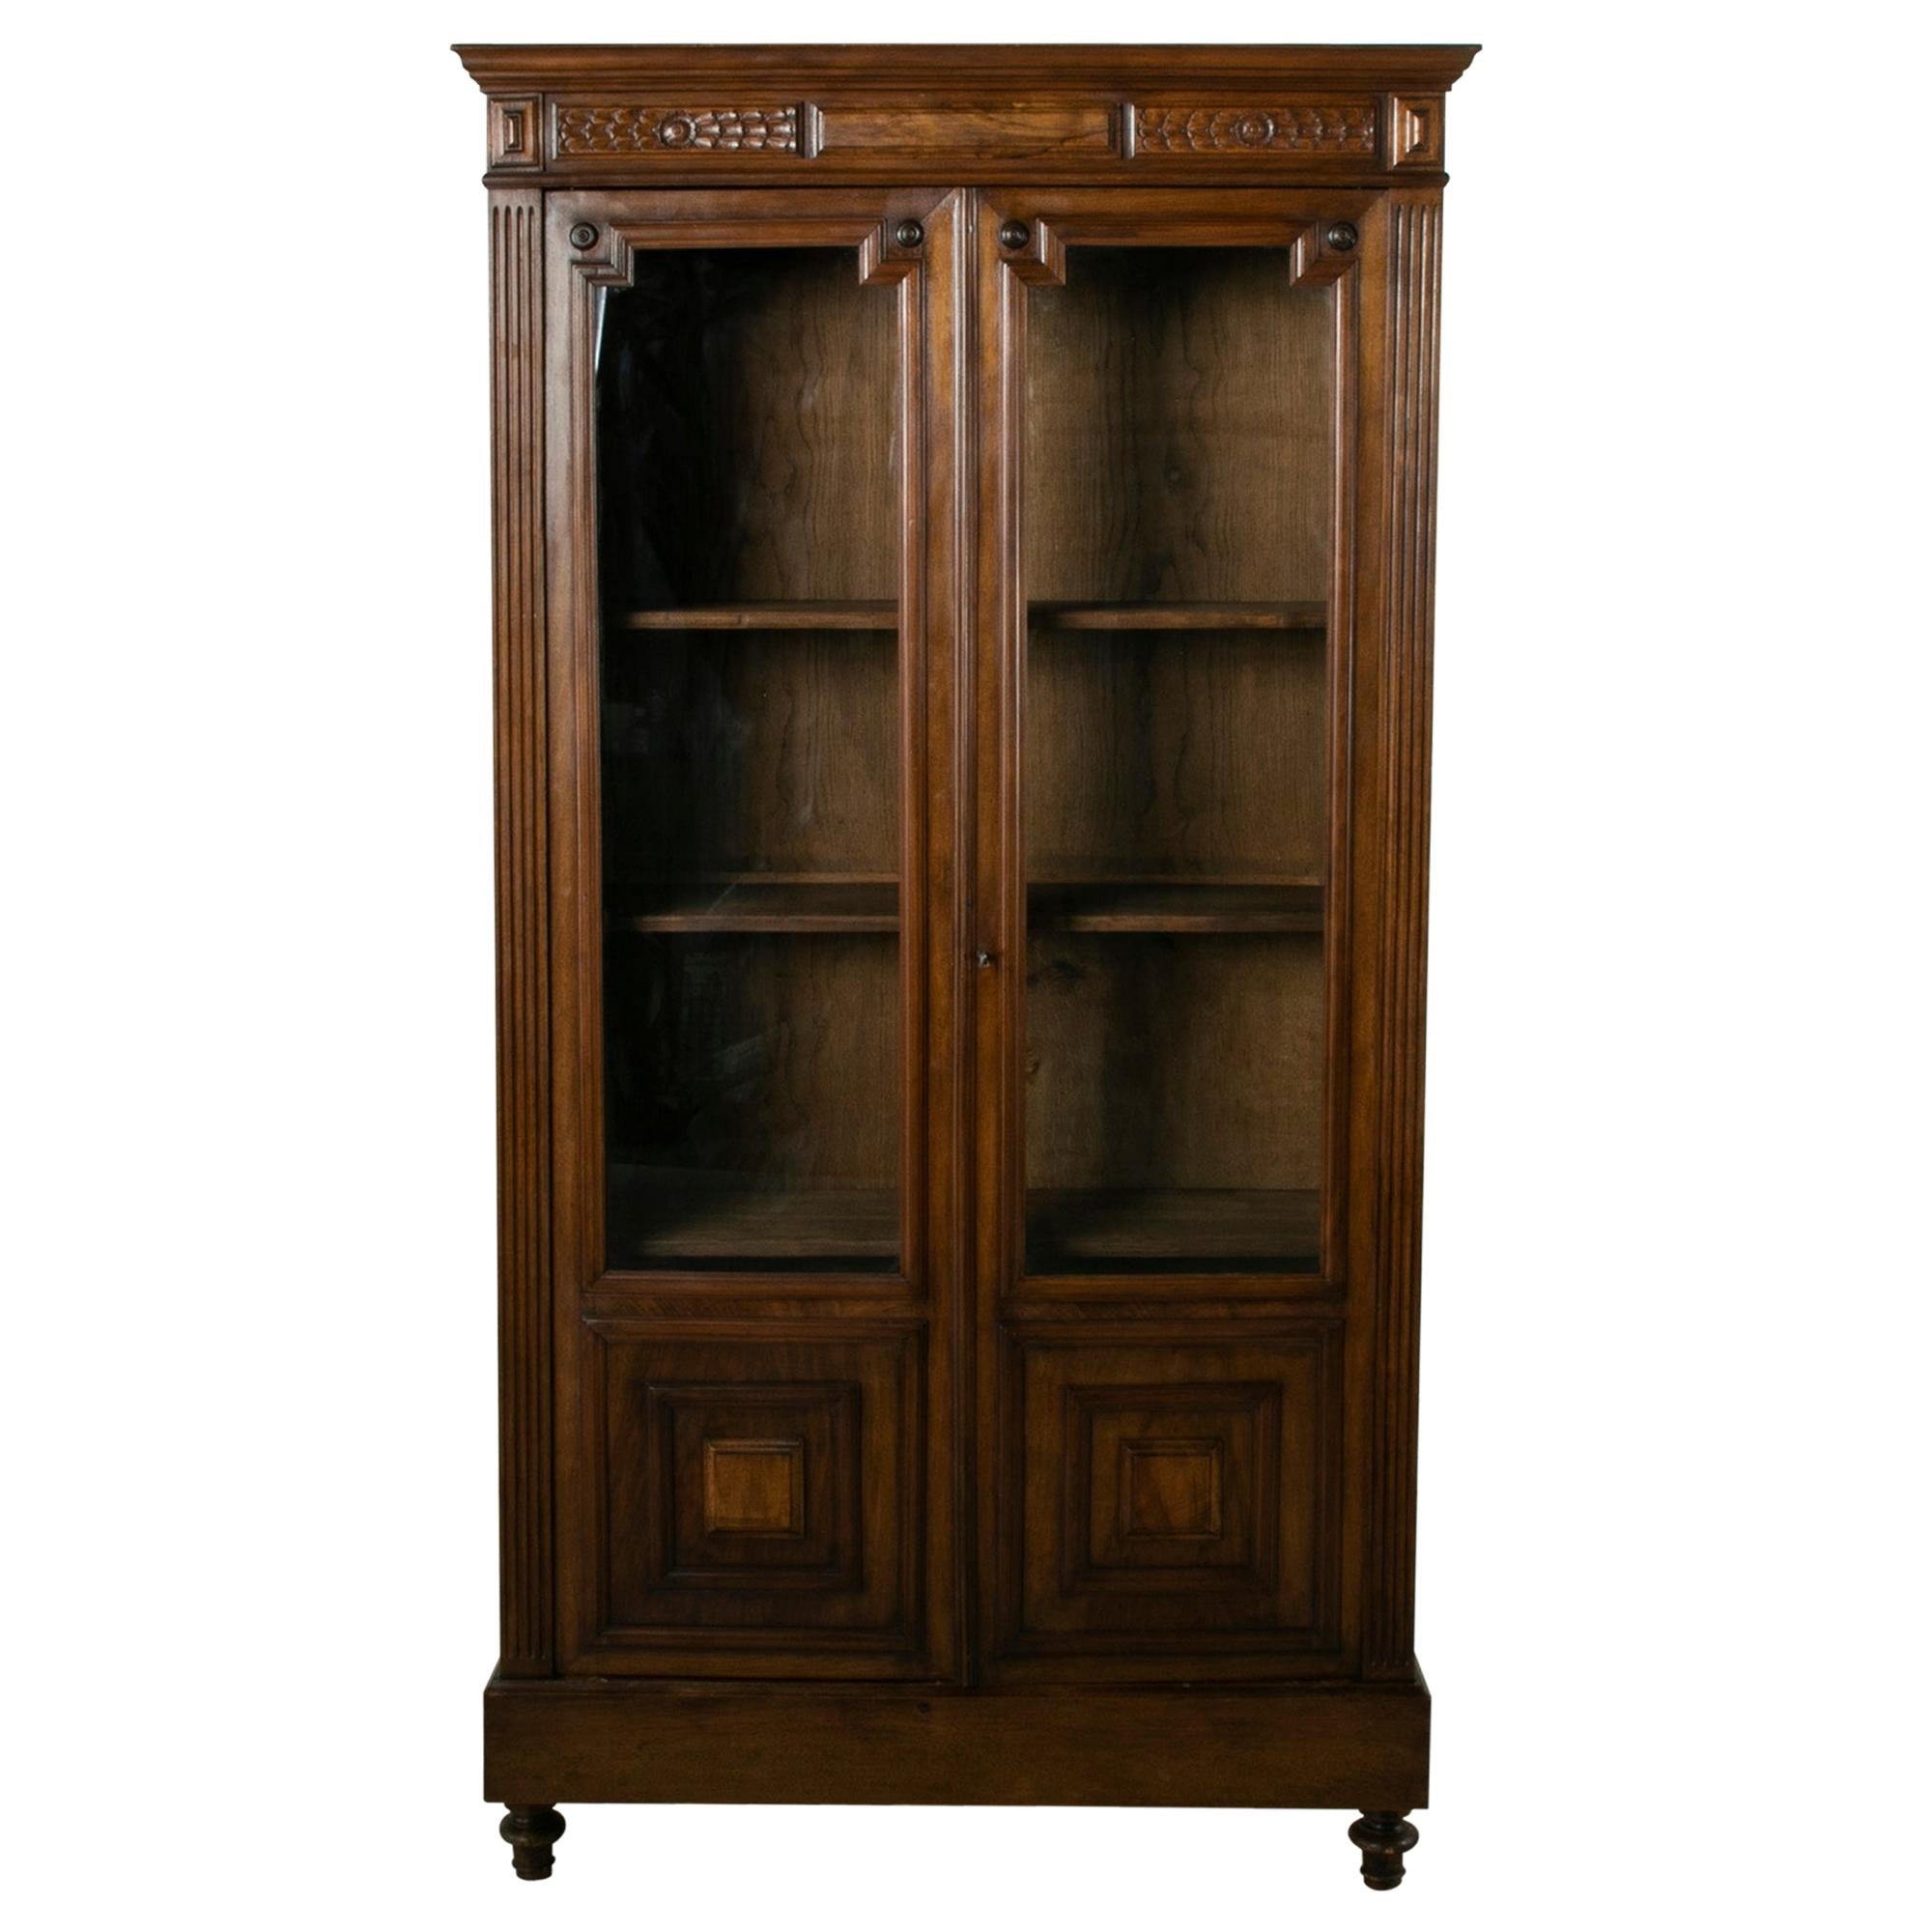 Late 19th Century French Henri II Style Hand-Carved Walnut Bookcase or Vitrine